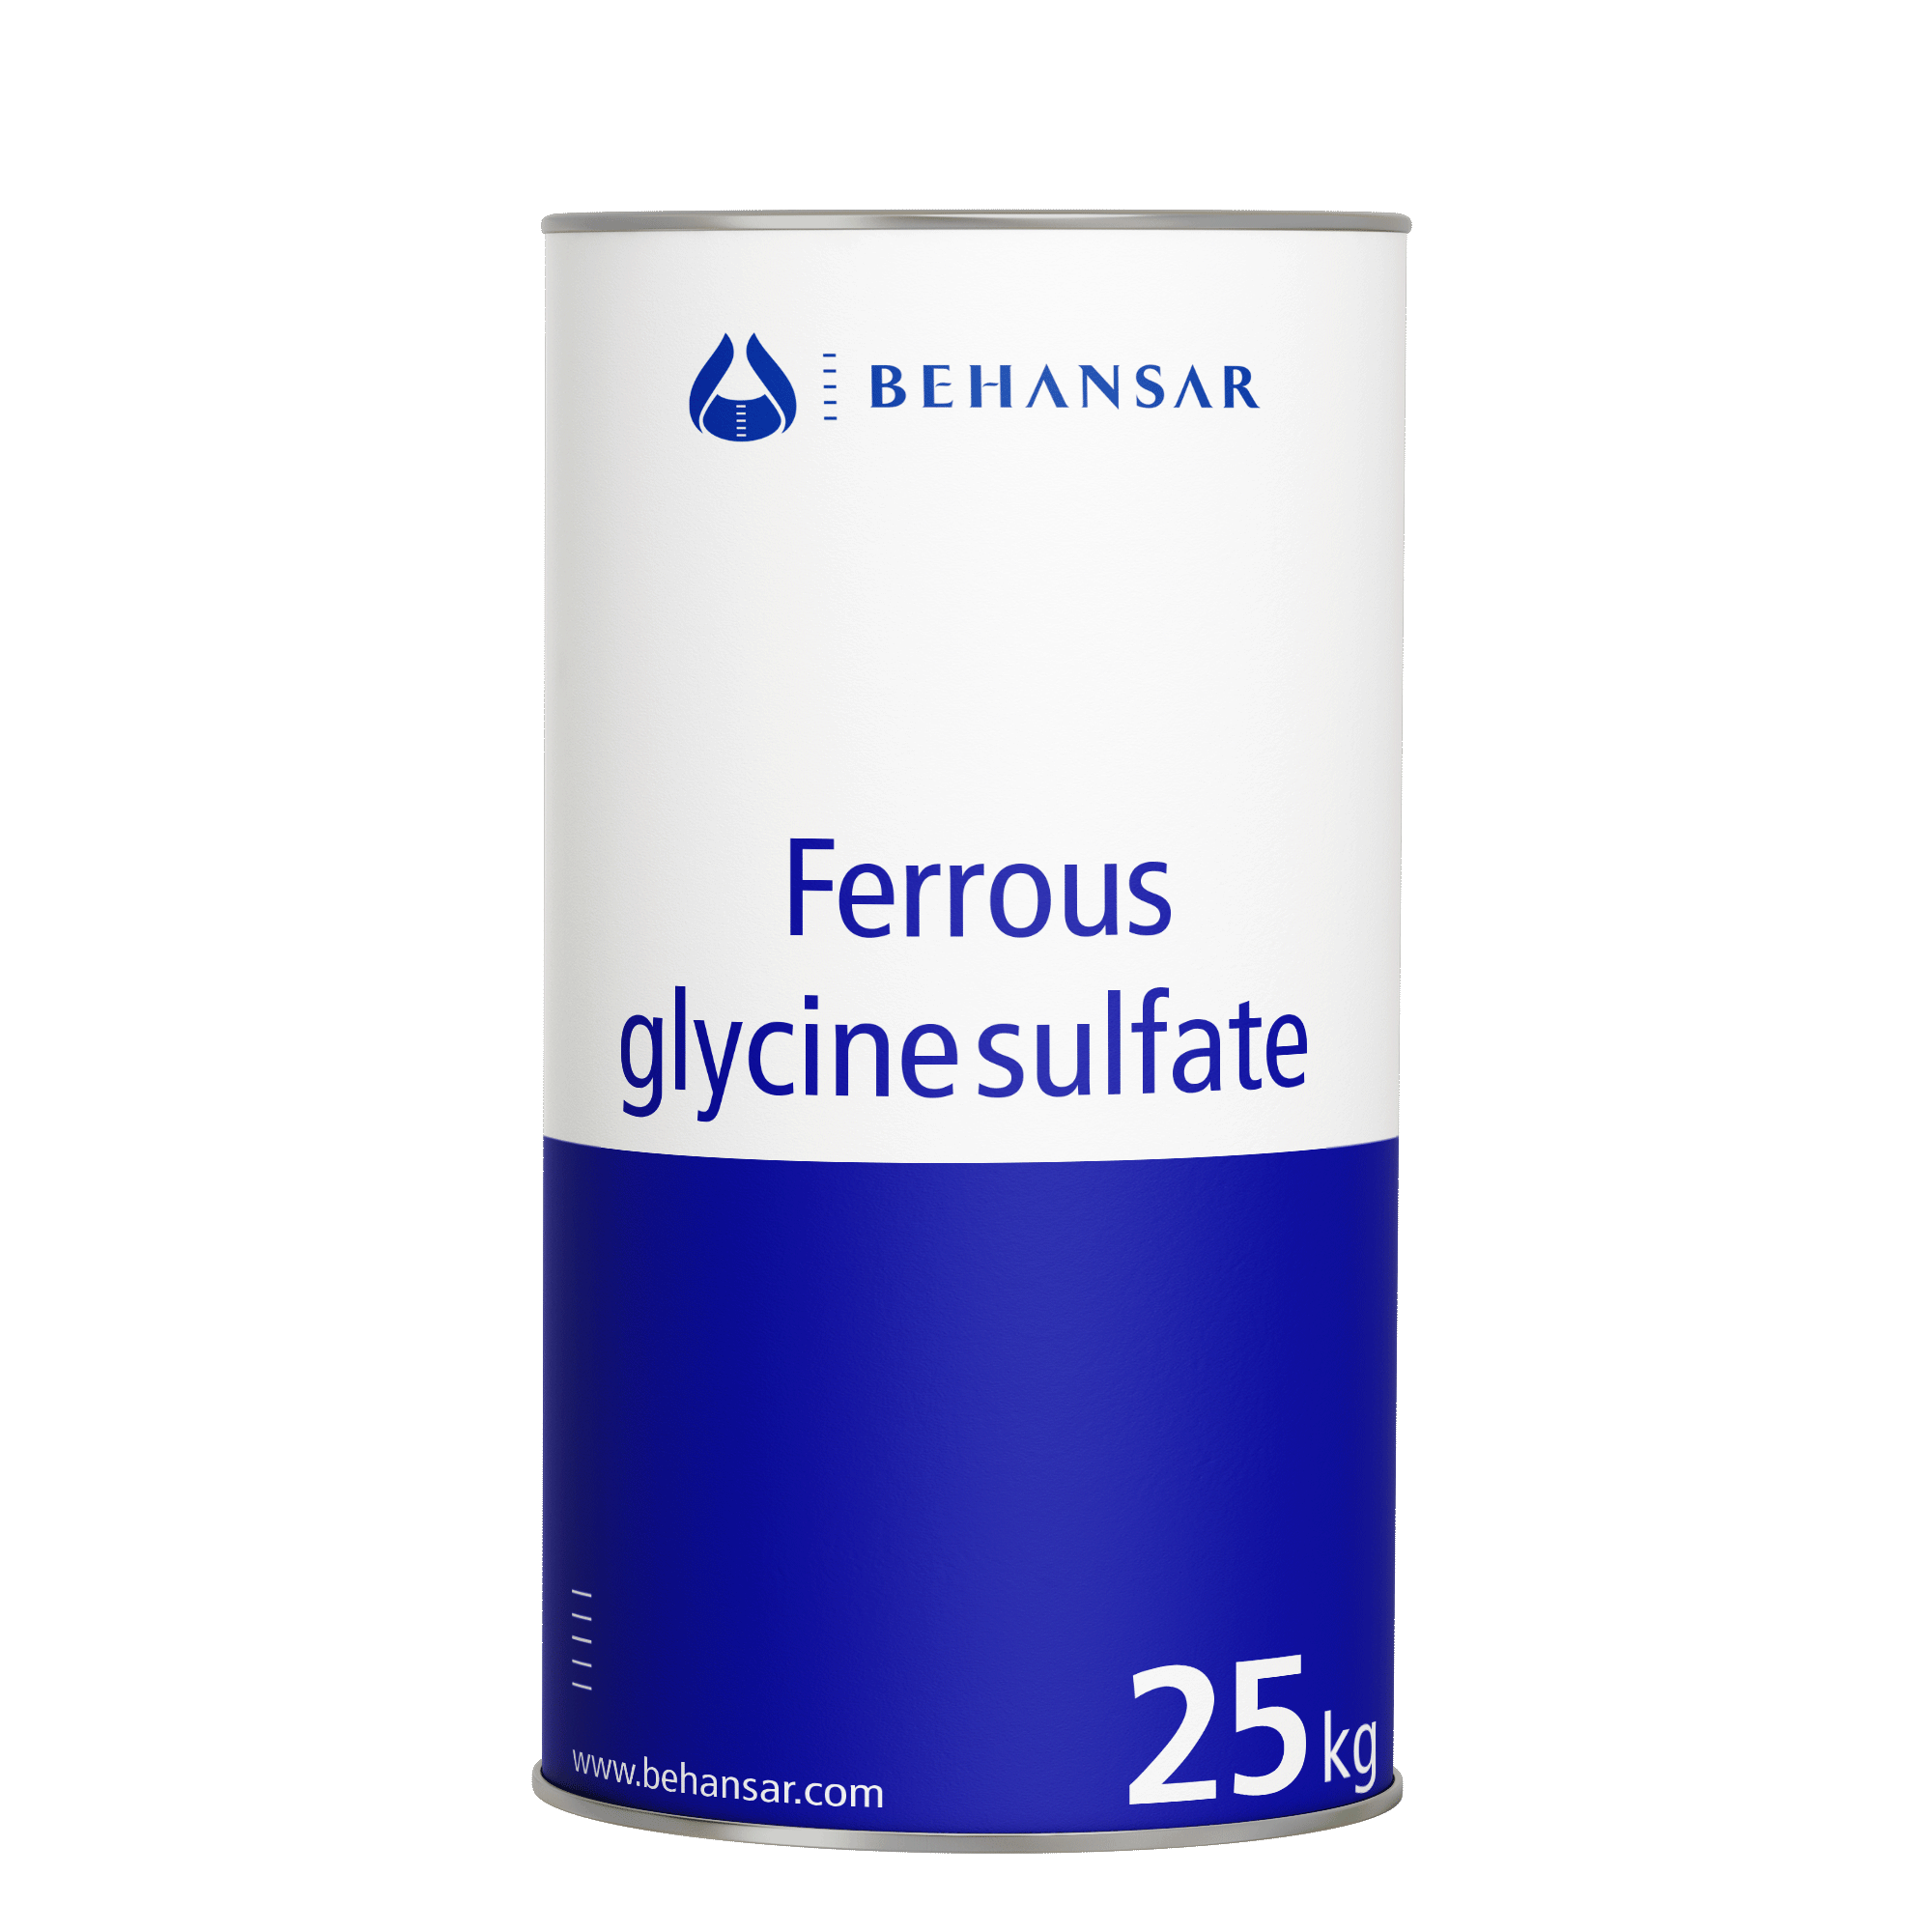 Ferrous glycine sulfate is one of the products of Behansar Co